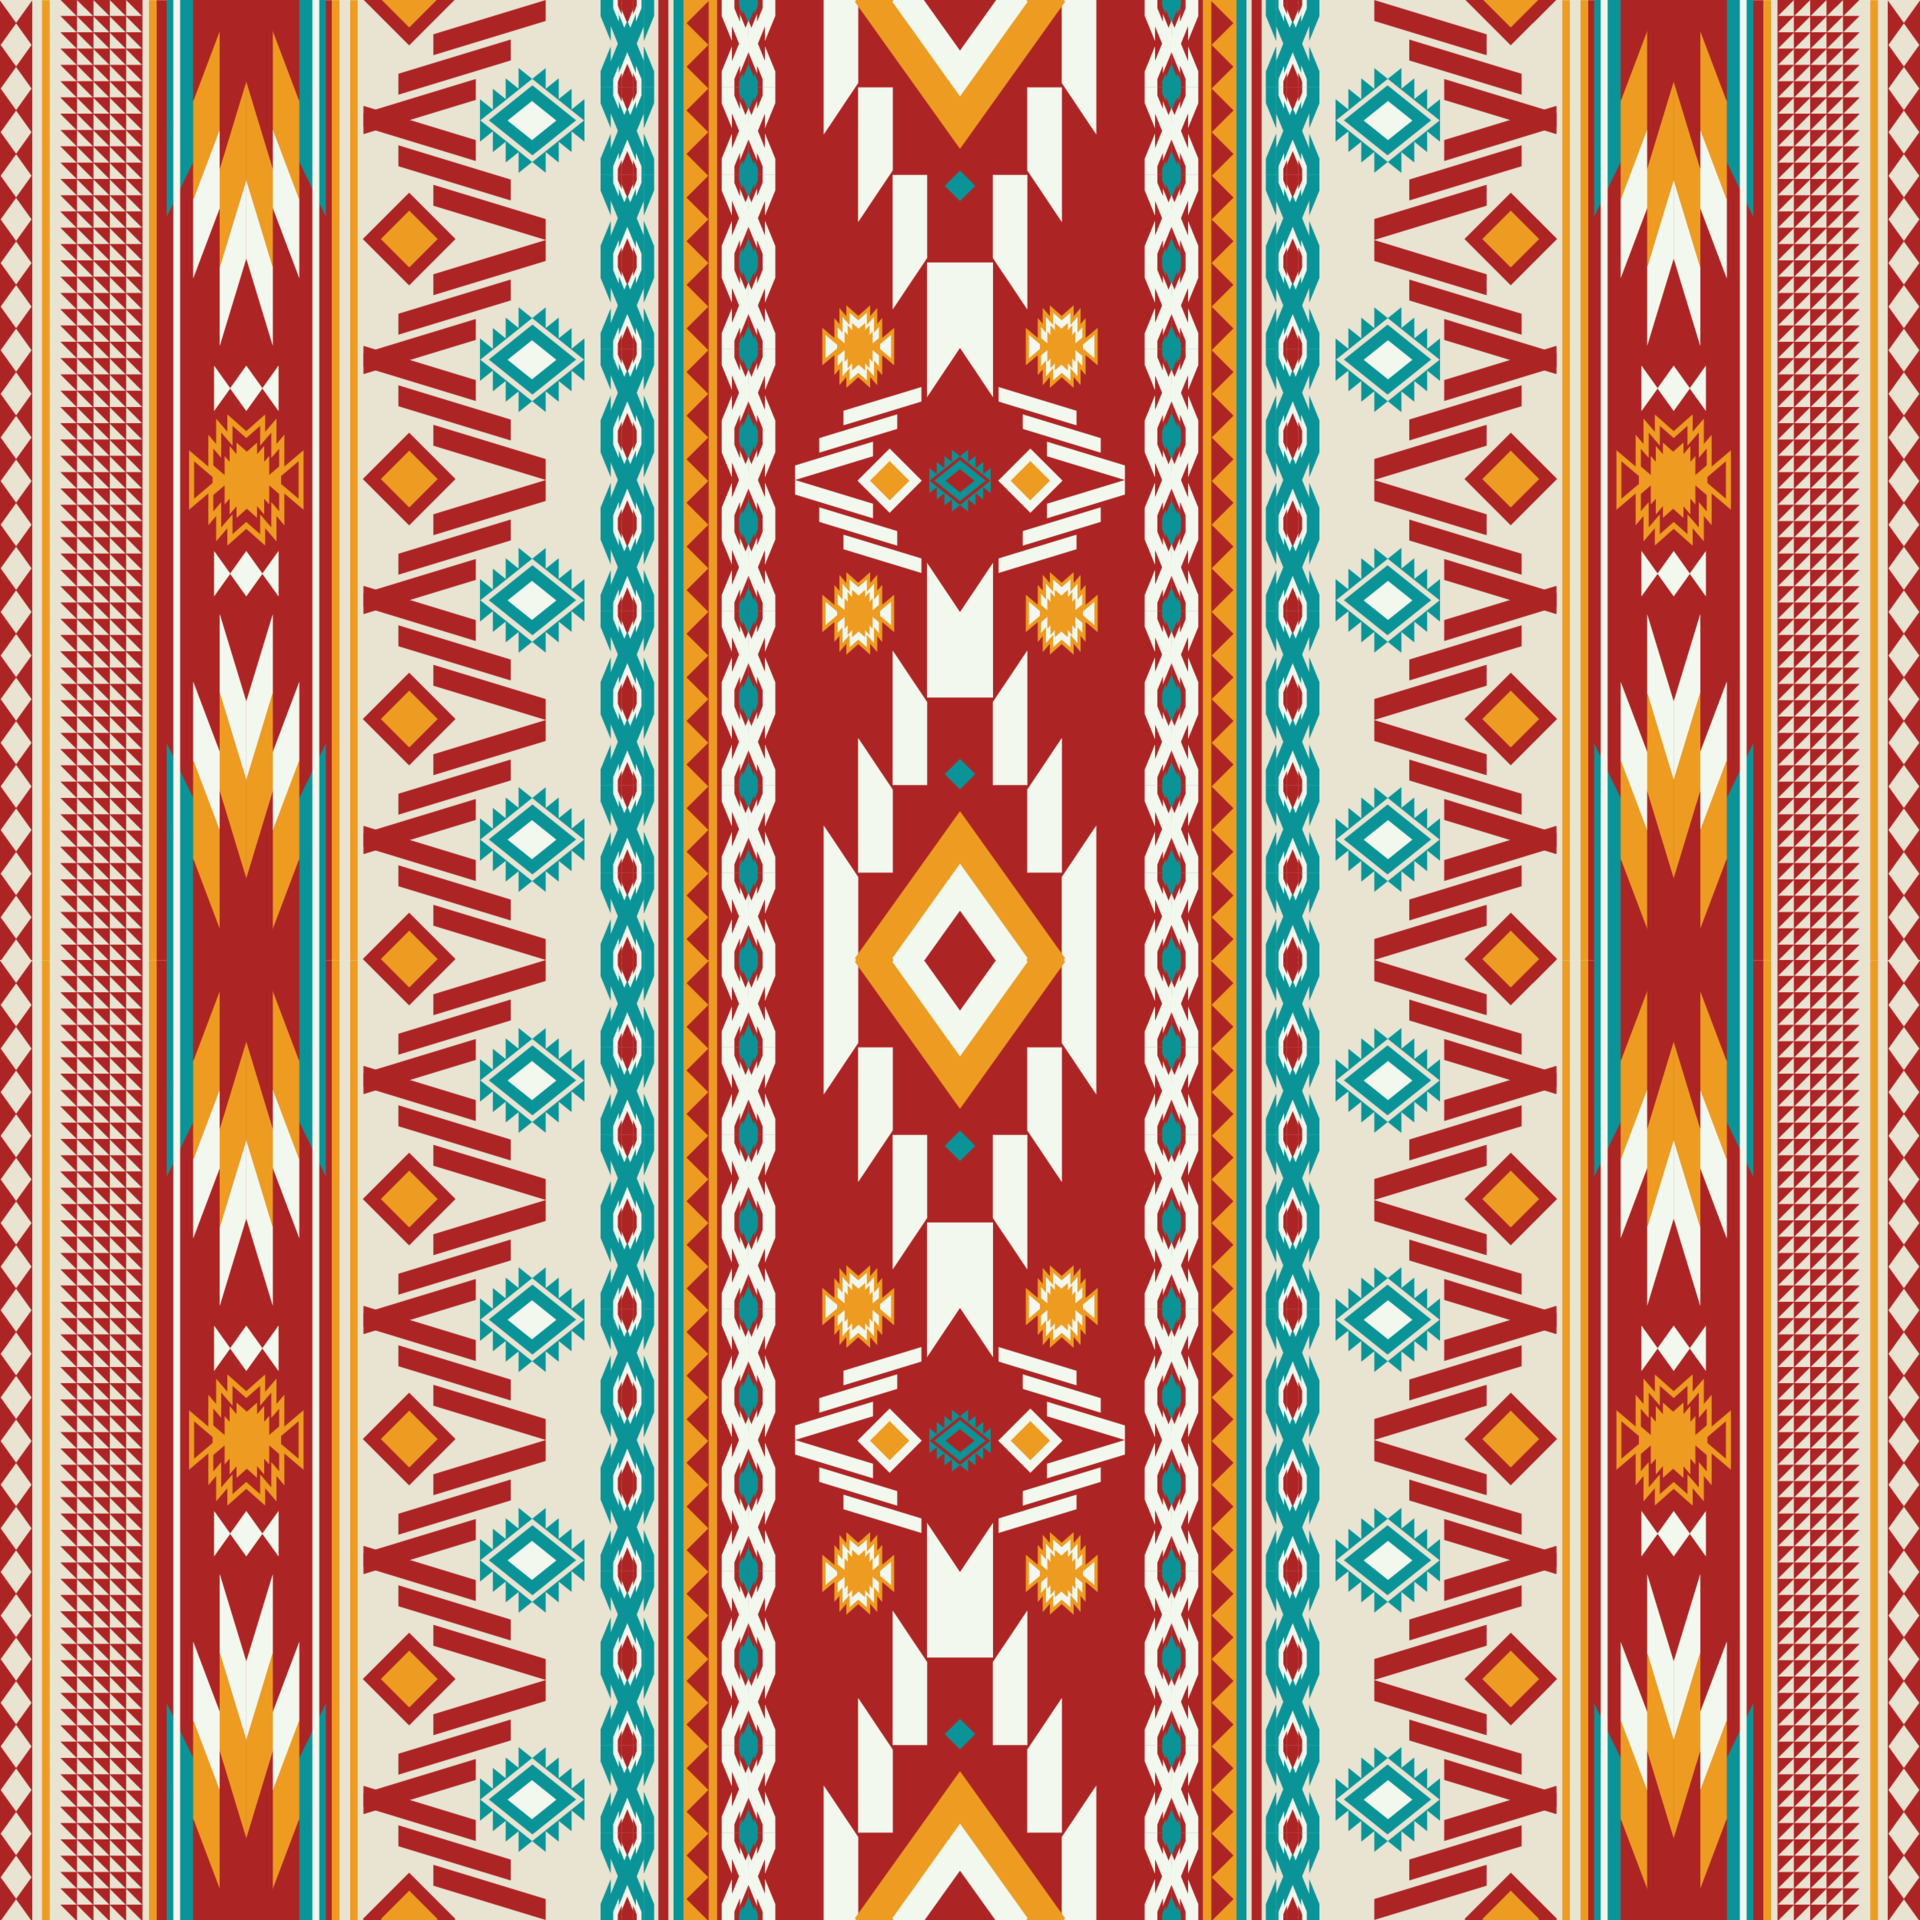 American Indian Tribal Patterns